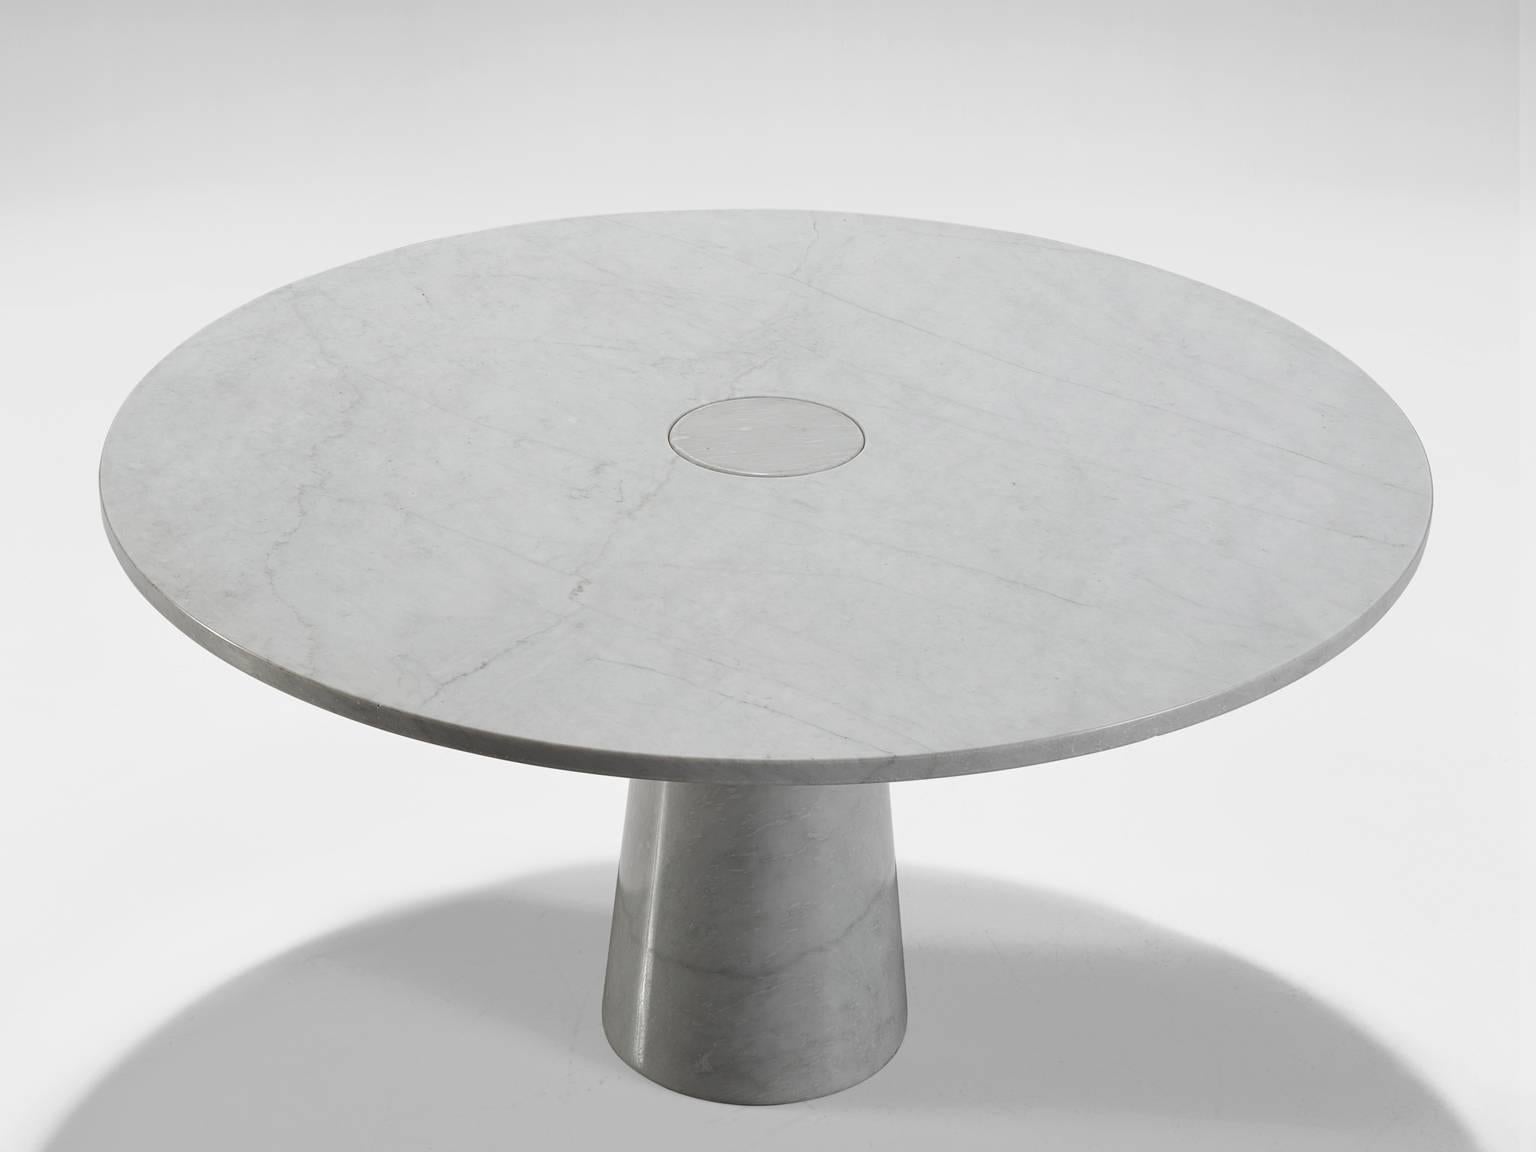 Angelo Mangiarotti, 'Eros' dining table, marble, Italy, 1970s. 

This architectural table is a skilful example of postmodern design. The circular table features no joints or clamps and is architectural in its structure featuring one single column